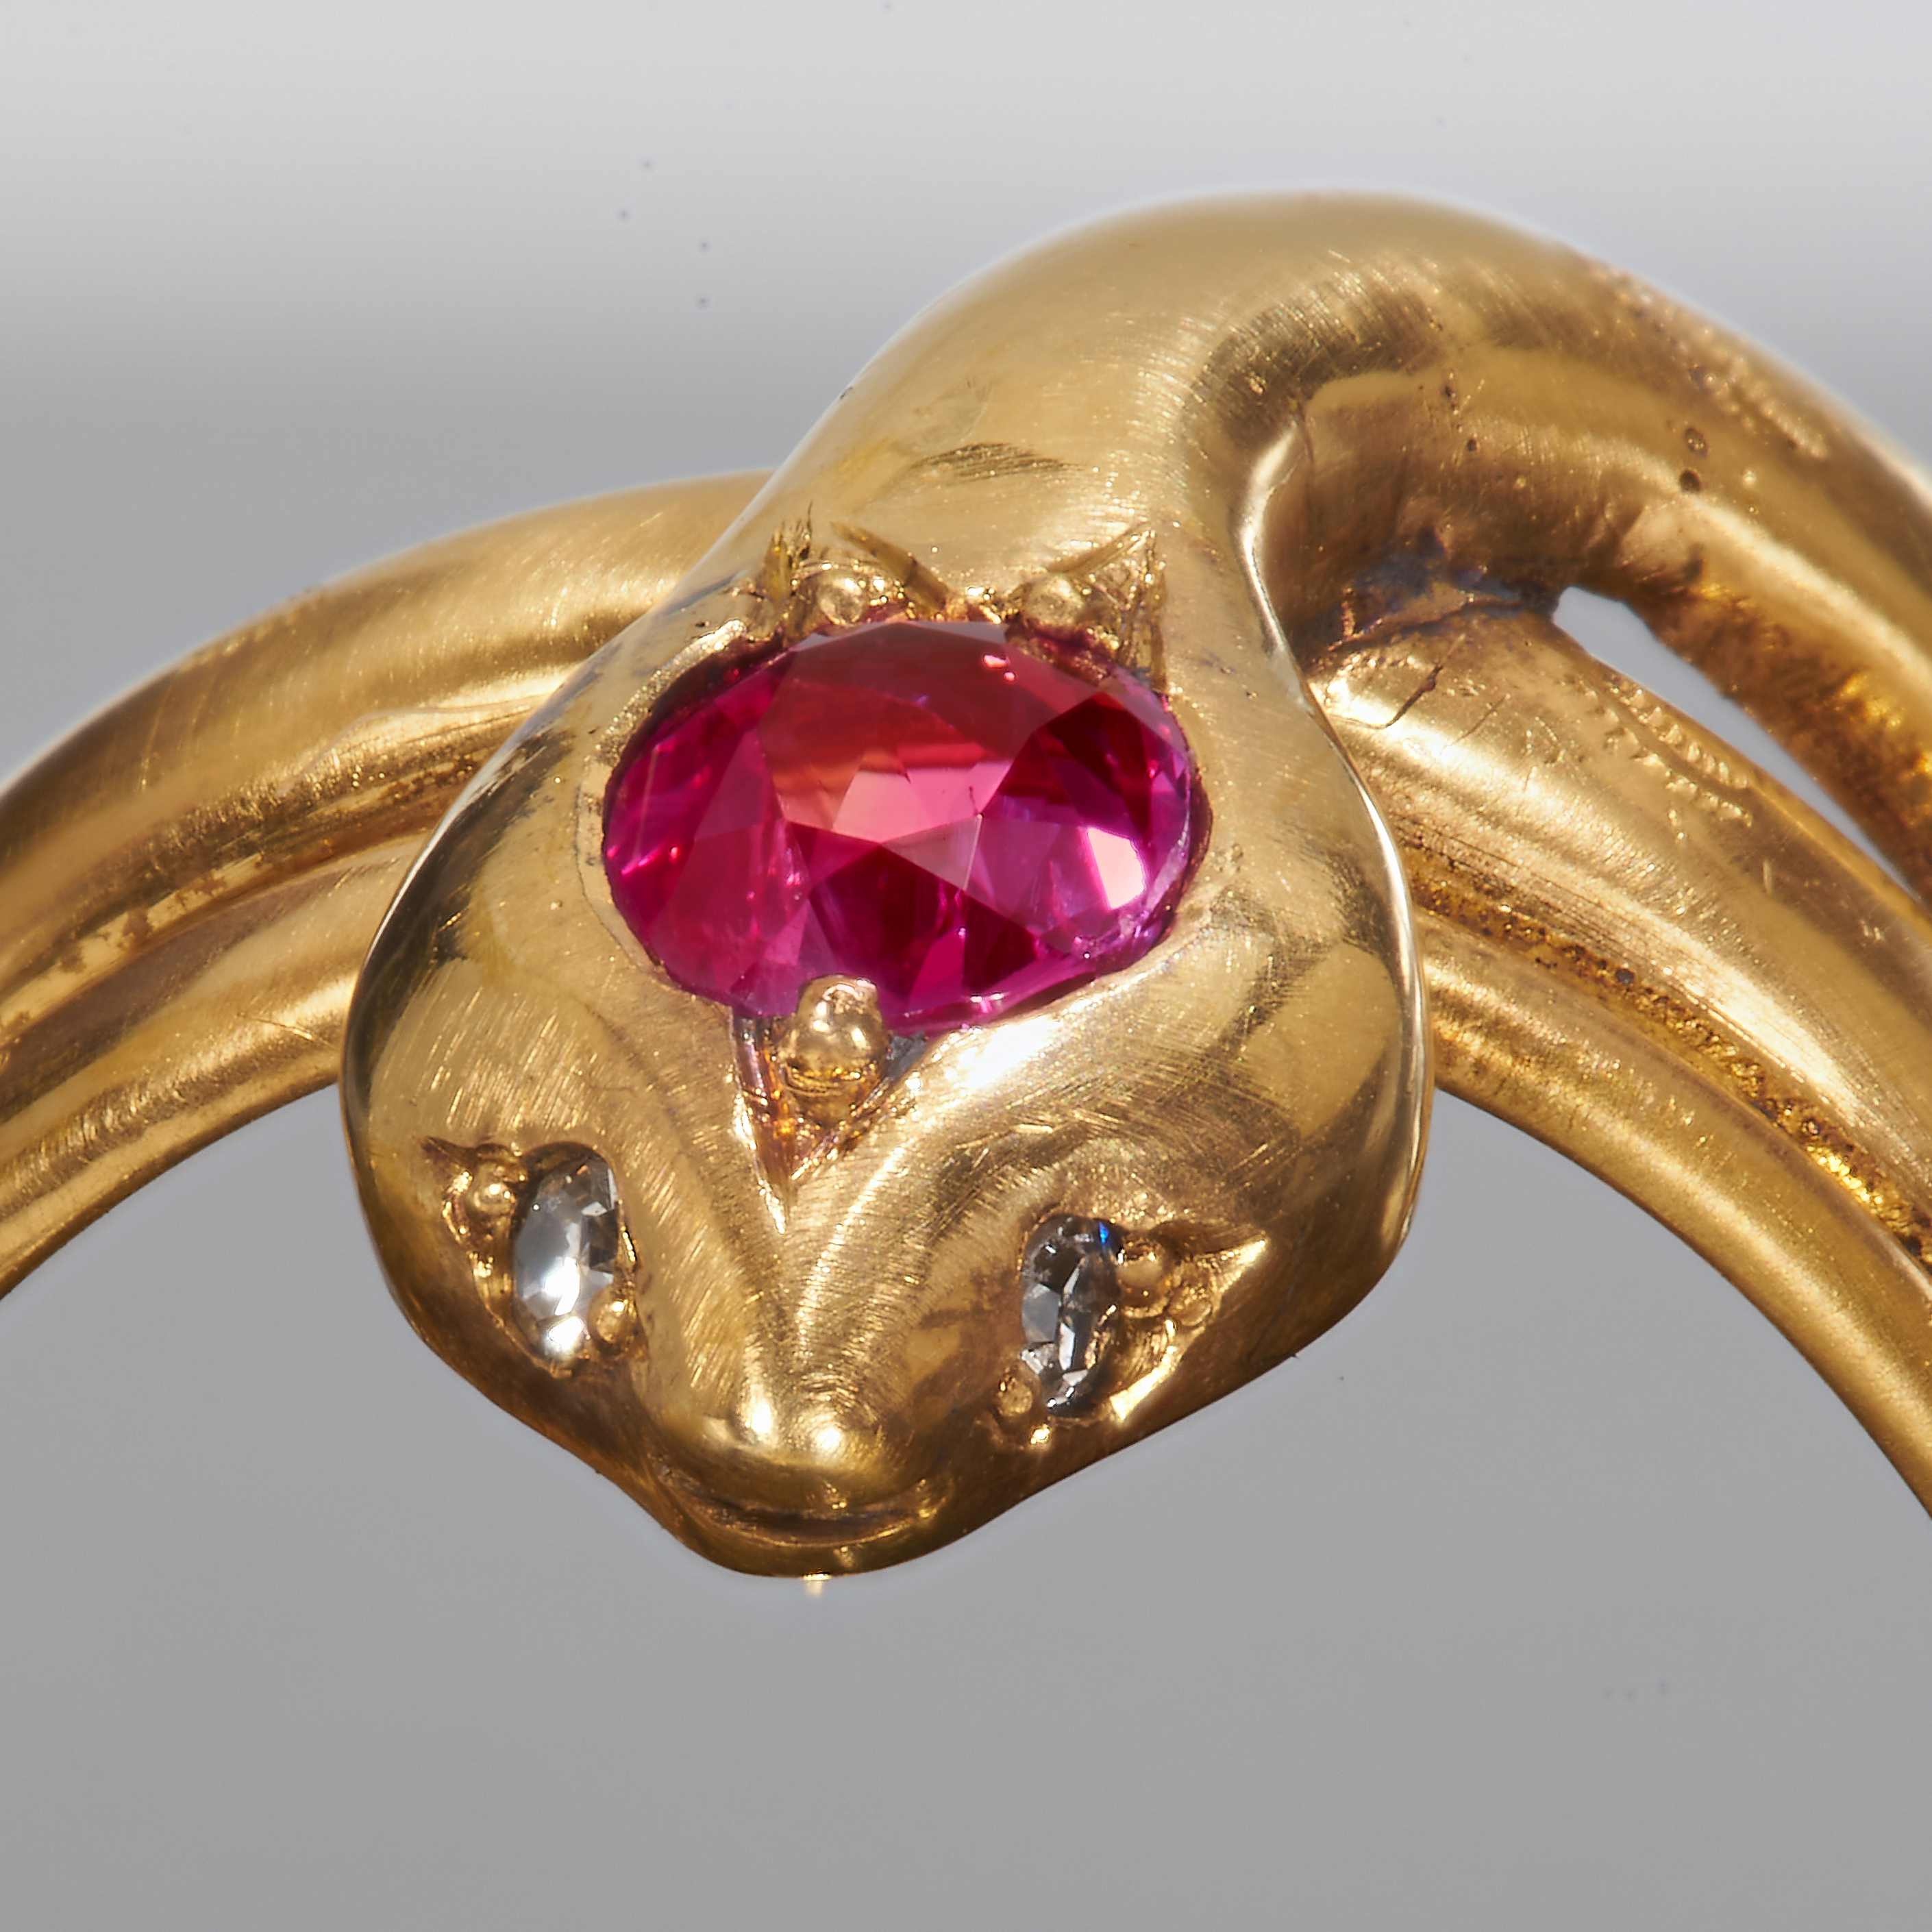 RUBY AND DIAMOND SNAKE RING - Image 2 of 2